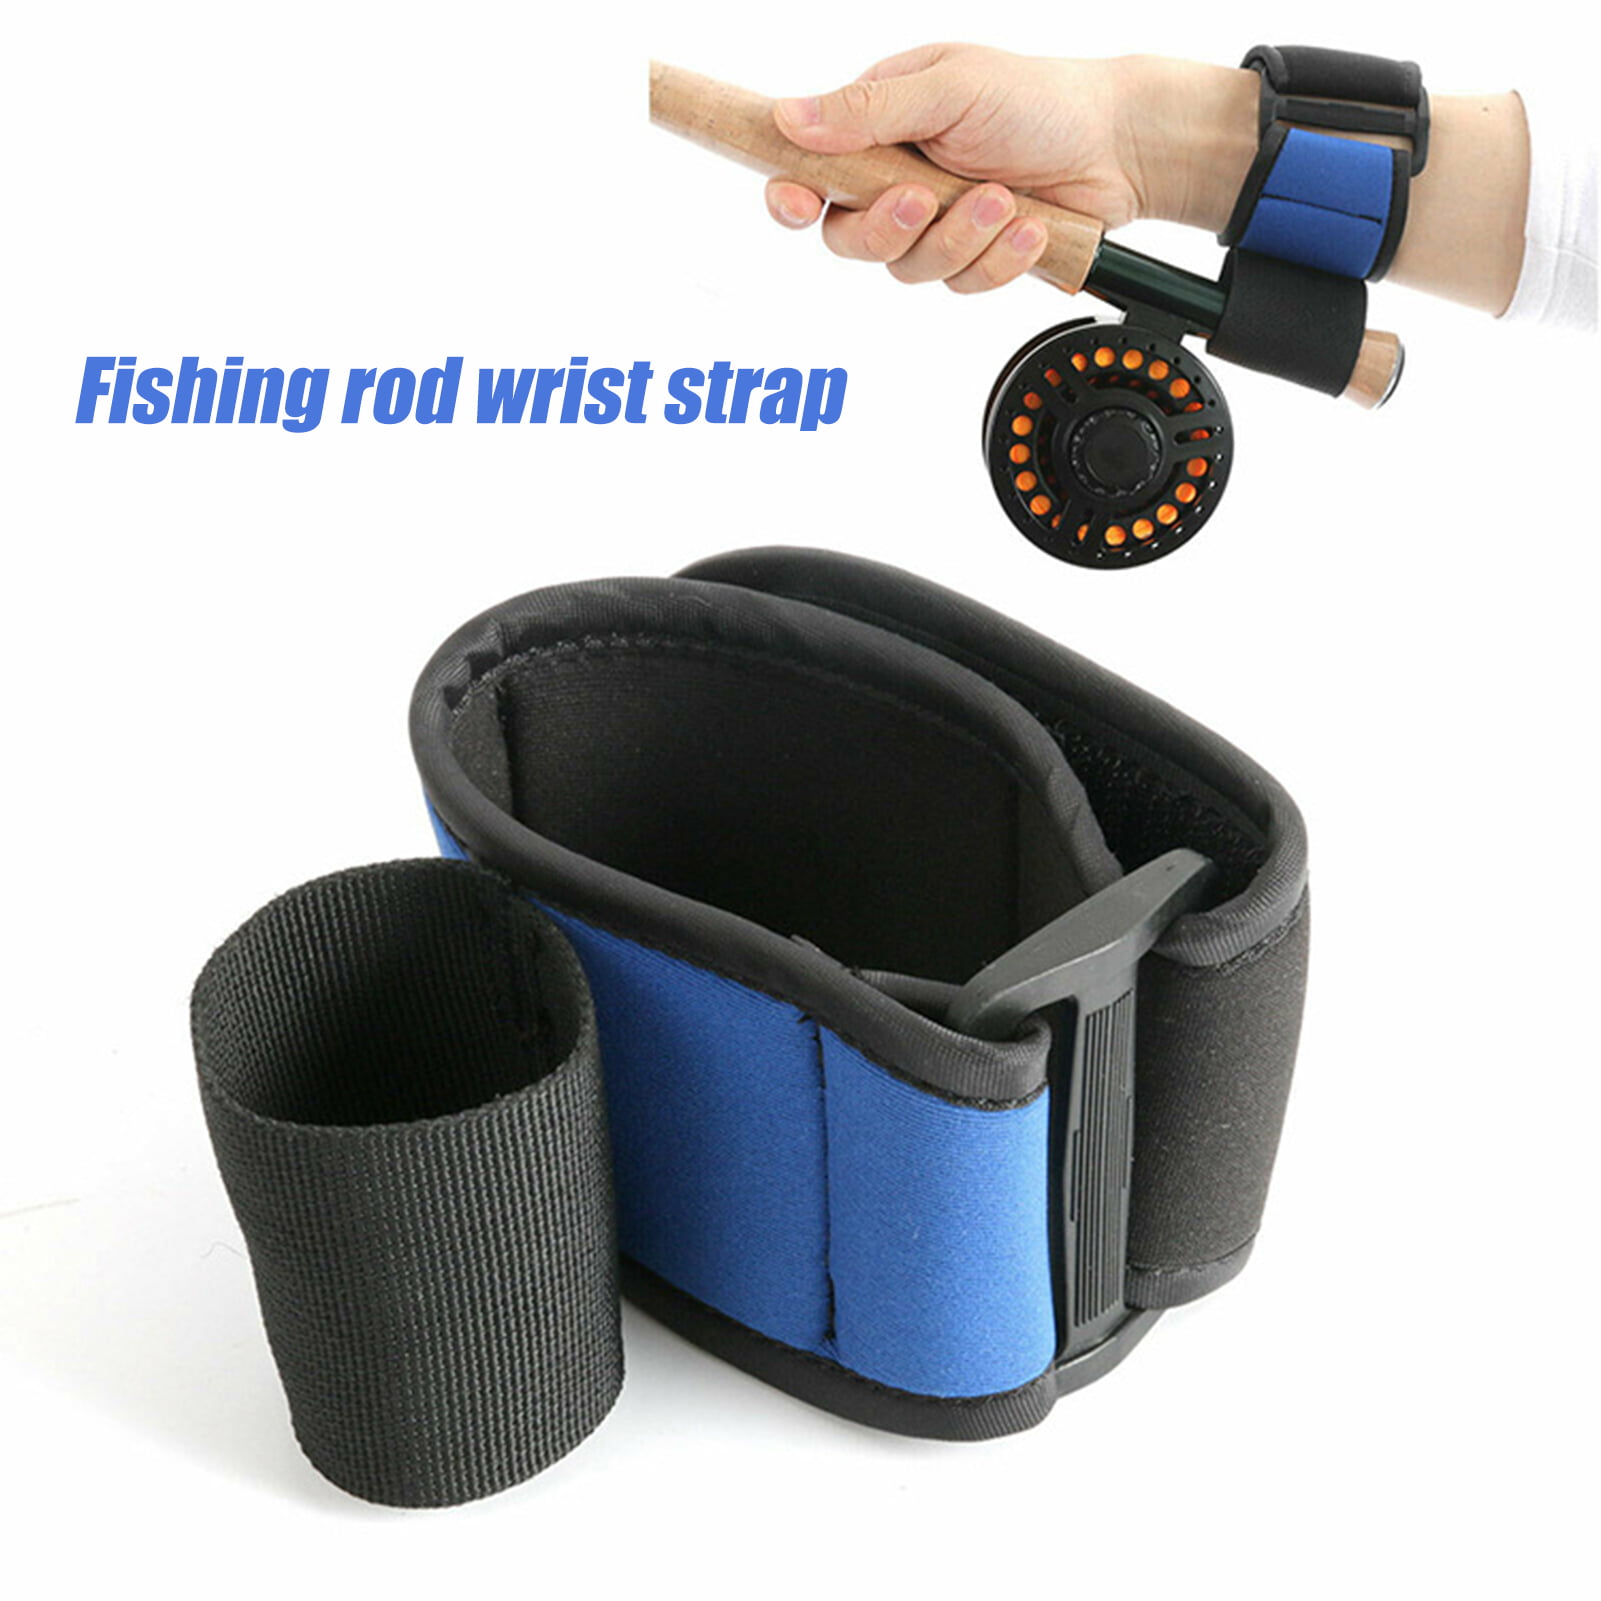 Convenient Fishing Rod Wristband Easy Use Neoprene Breathable Flexible Fishing  Cover Band for Outdoor Fishing, Aid Wrist Support to Prevent Injury 